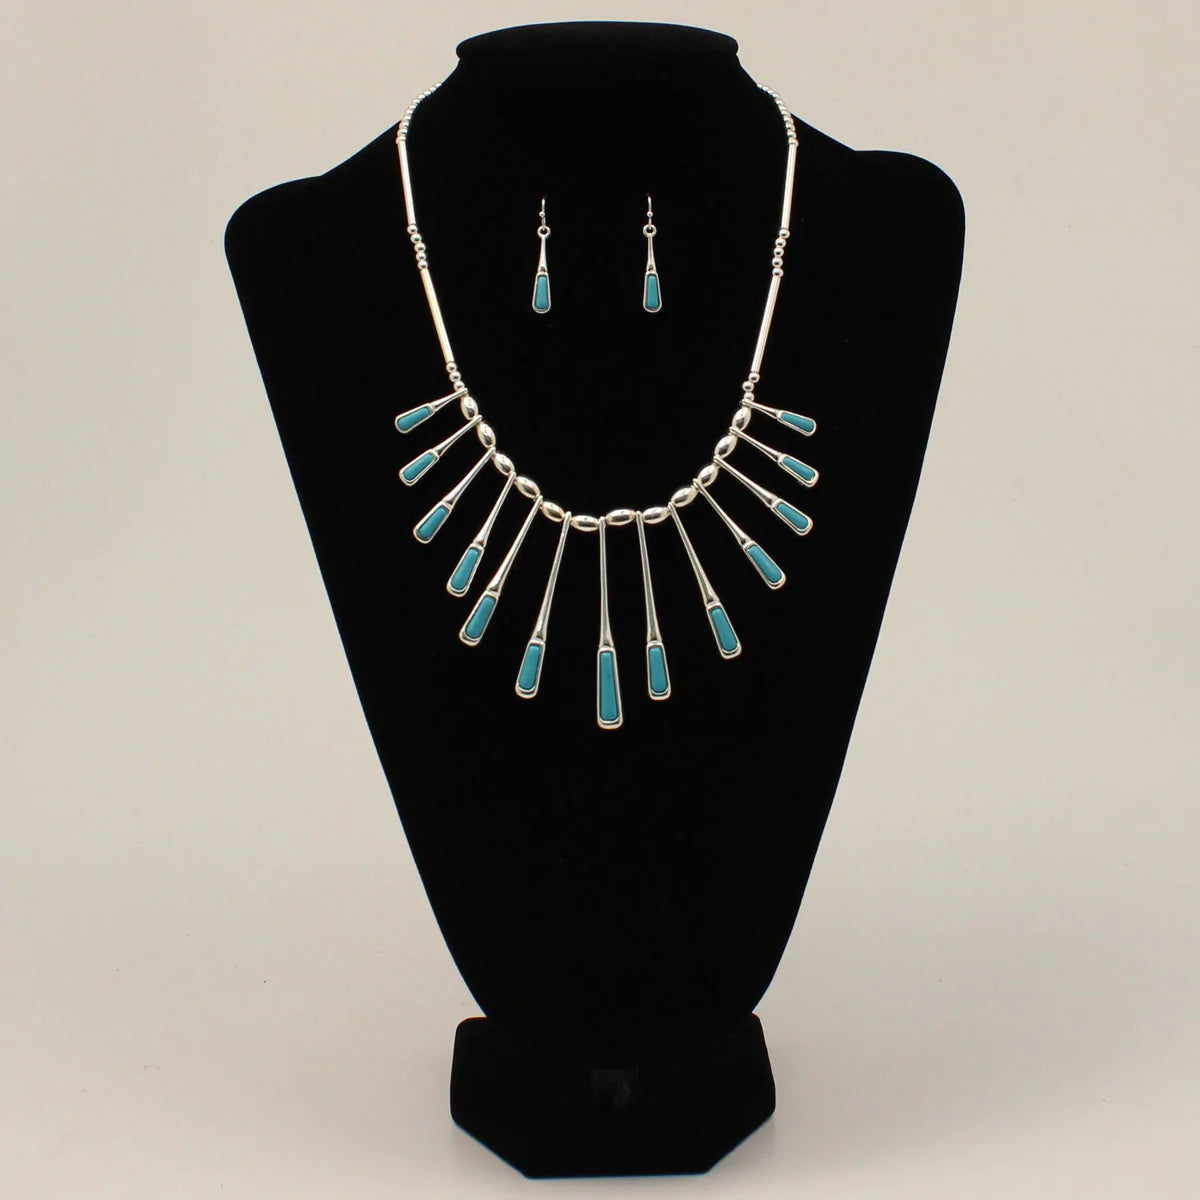 Silver Strike Silver and Turquoise Necklace Set